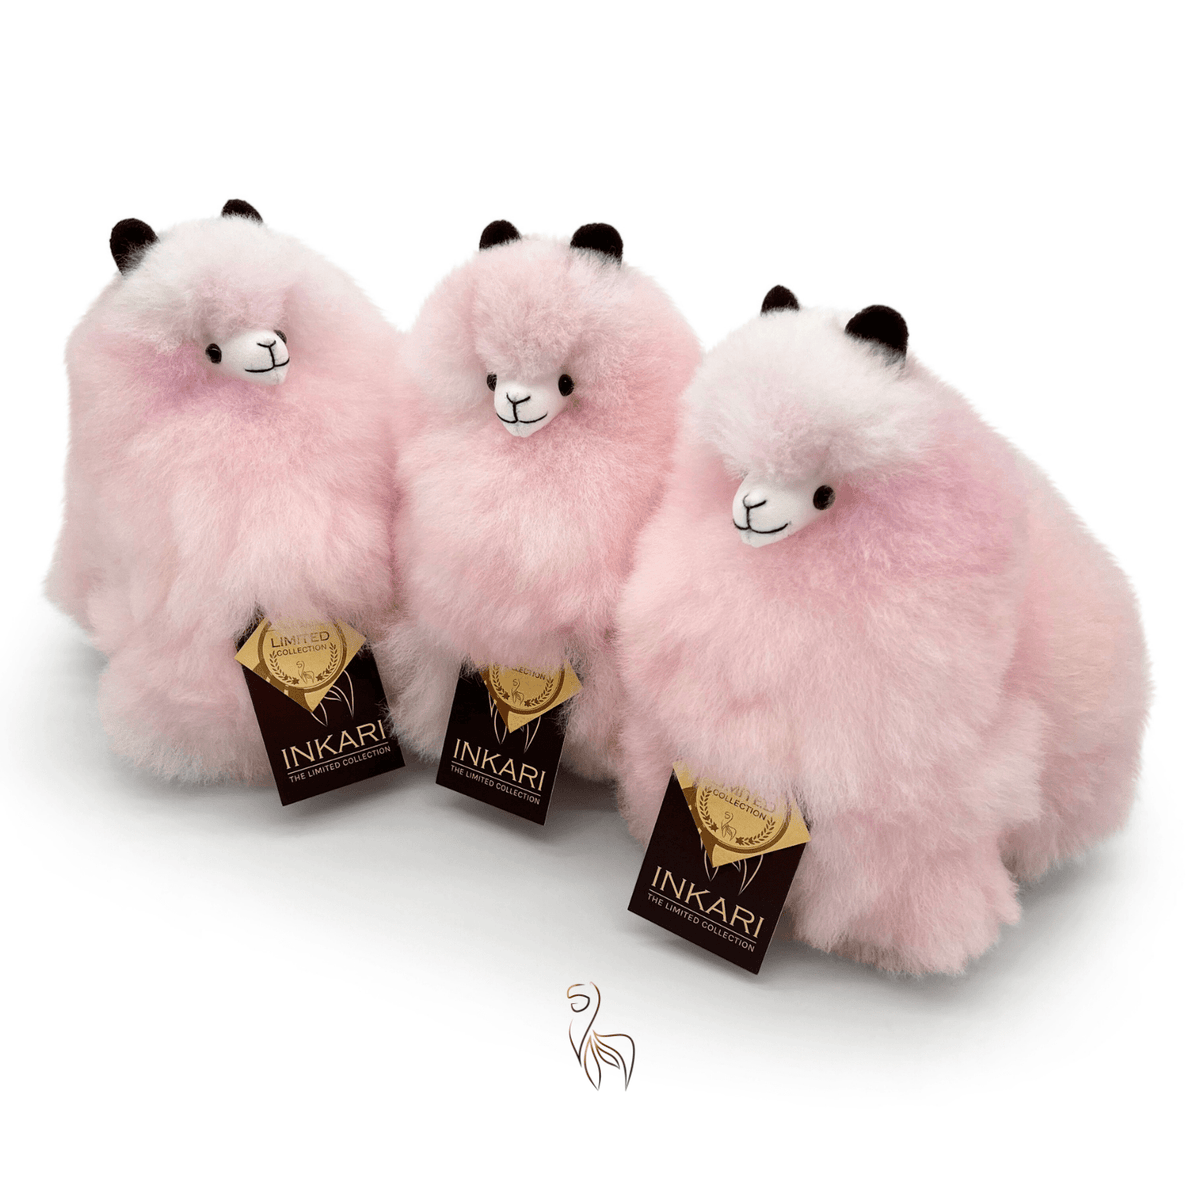 Marshmallow - Small Alpaca Toy (23cm) - Limited Edition